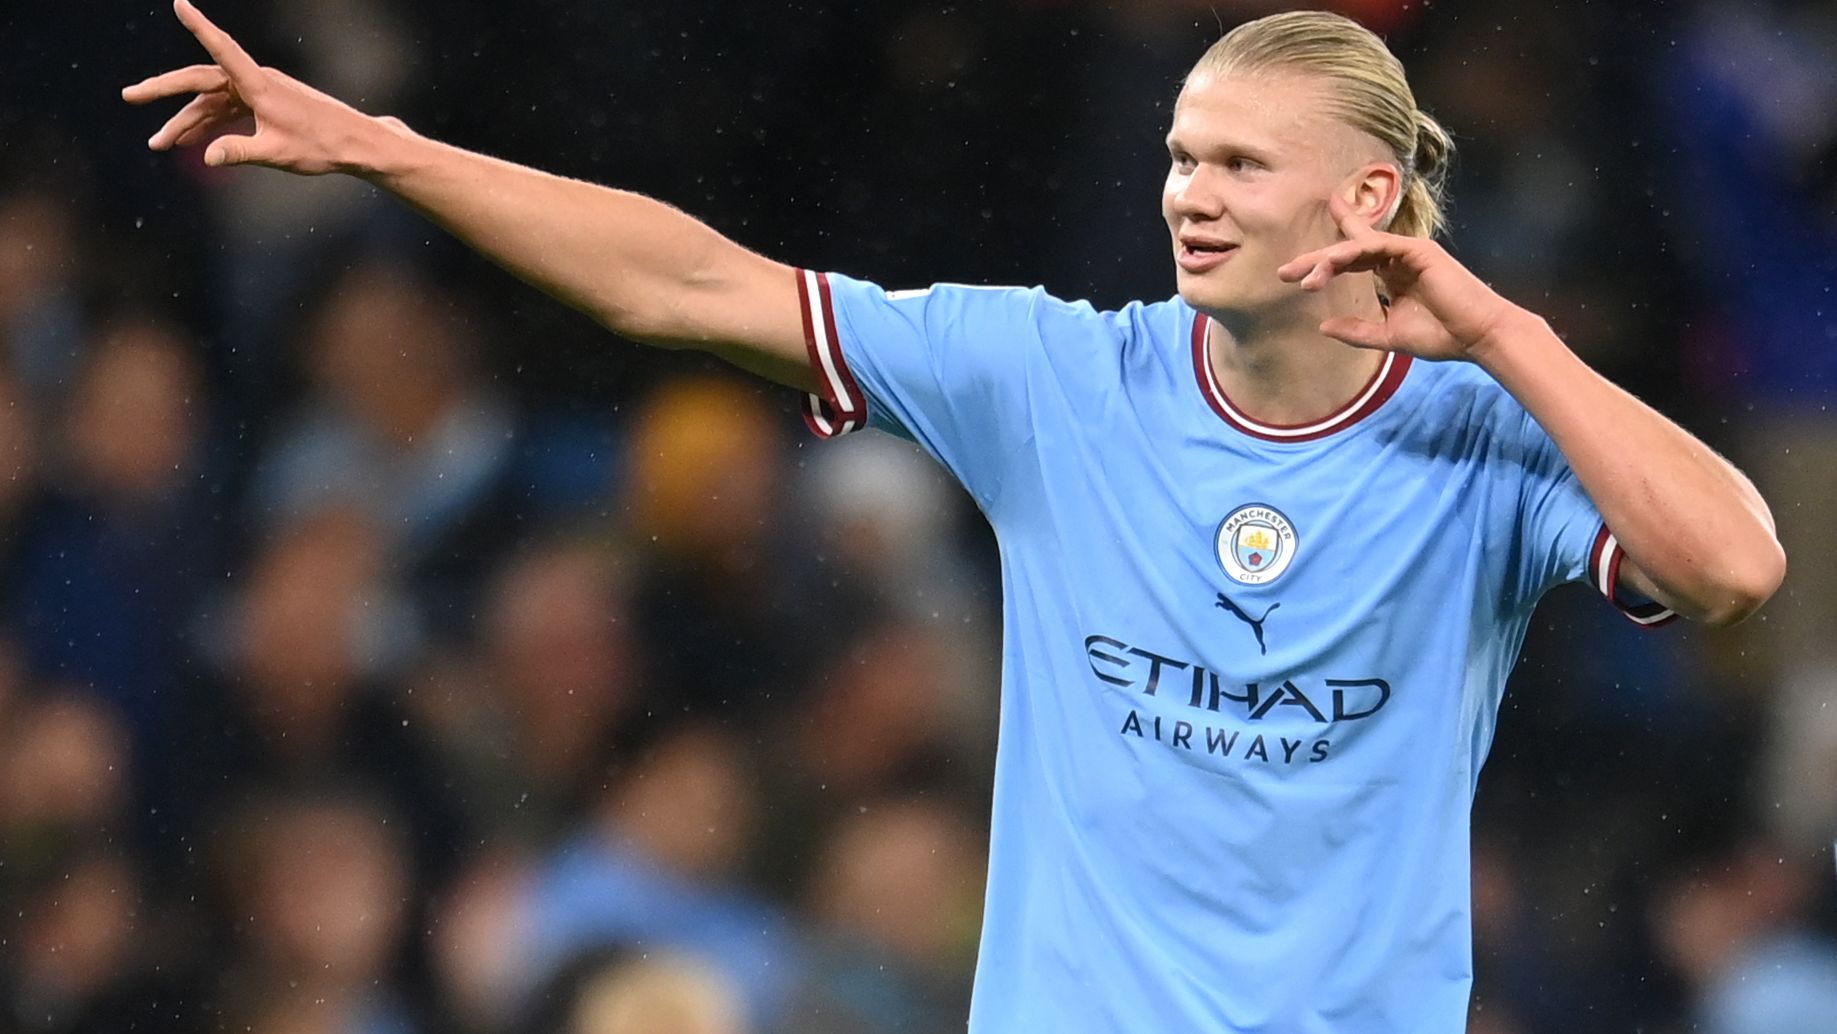 Erling Haaland of Manchester City celebrates after scoring his second goal.